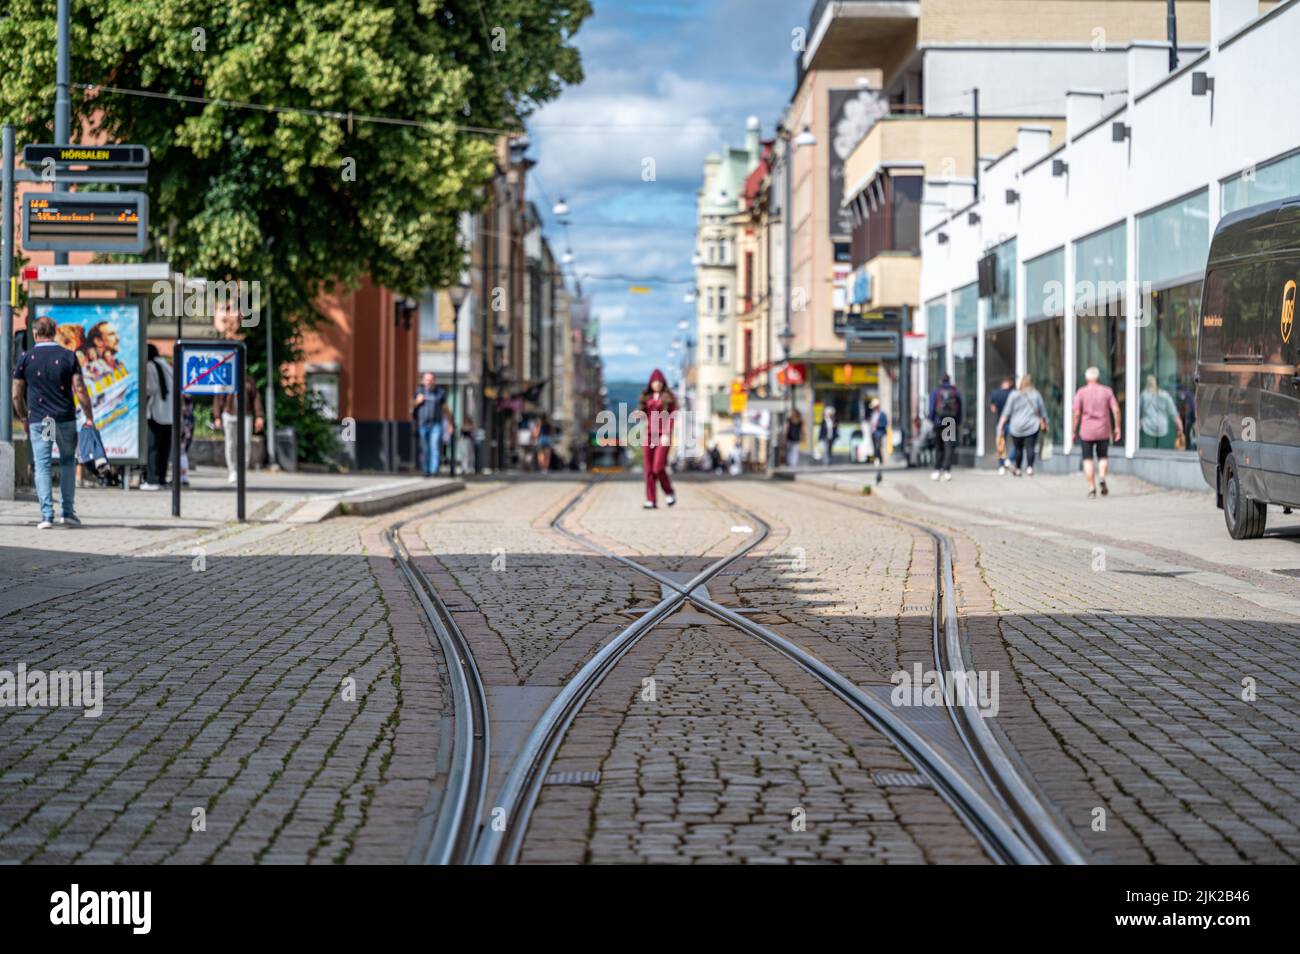 Main street Drottninggatan in the city center of Norrkoping, Sweden. Norrkoping is a historic industrial town. Stock Photo